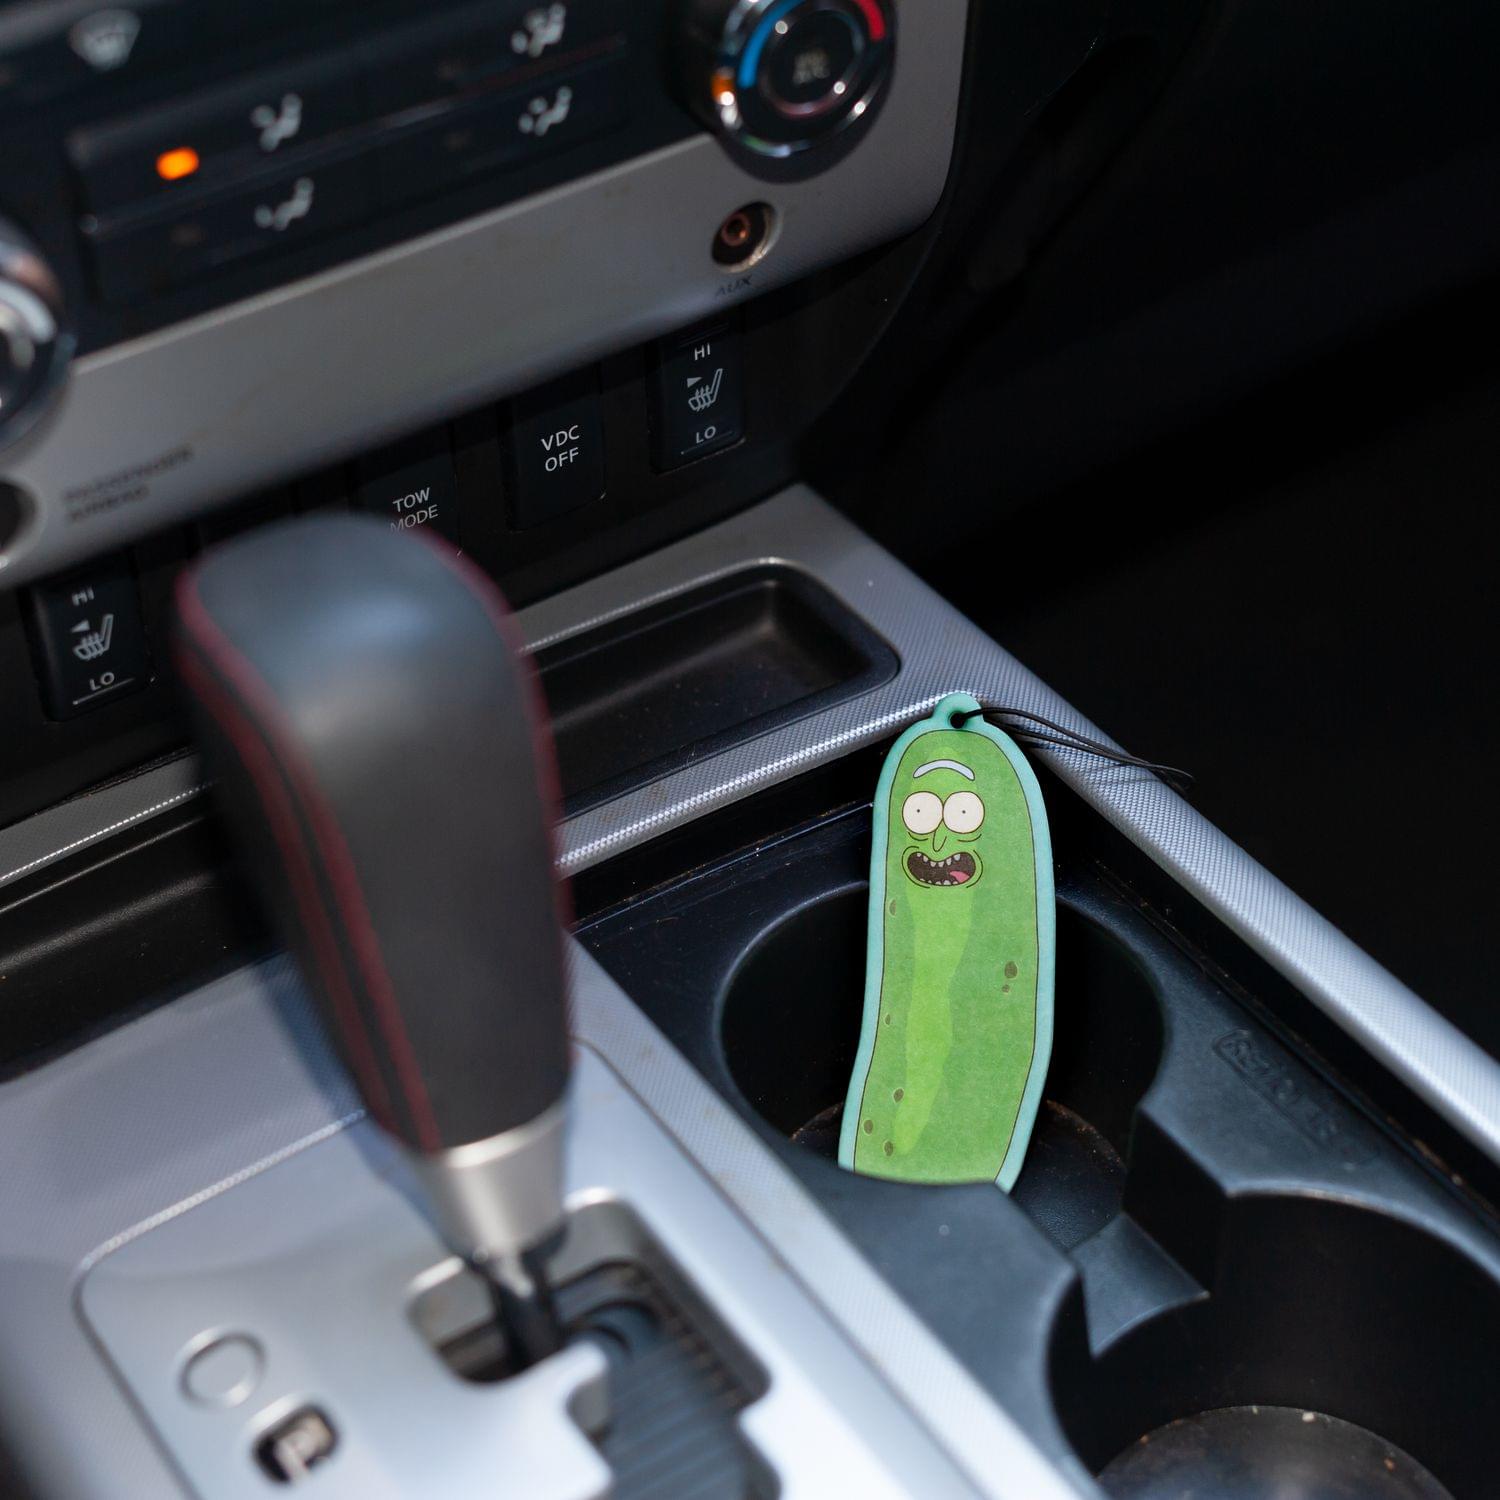 Rick And Morty Official Pickle Rick Collectible Air Freshener | Garlic Scented